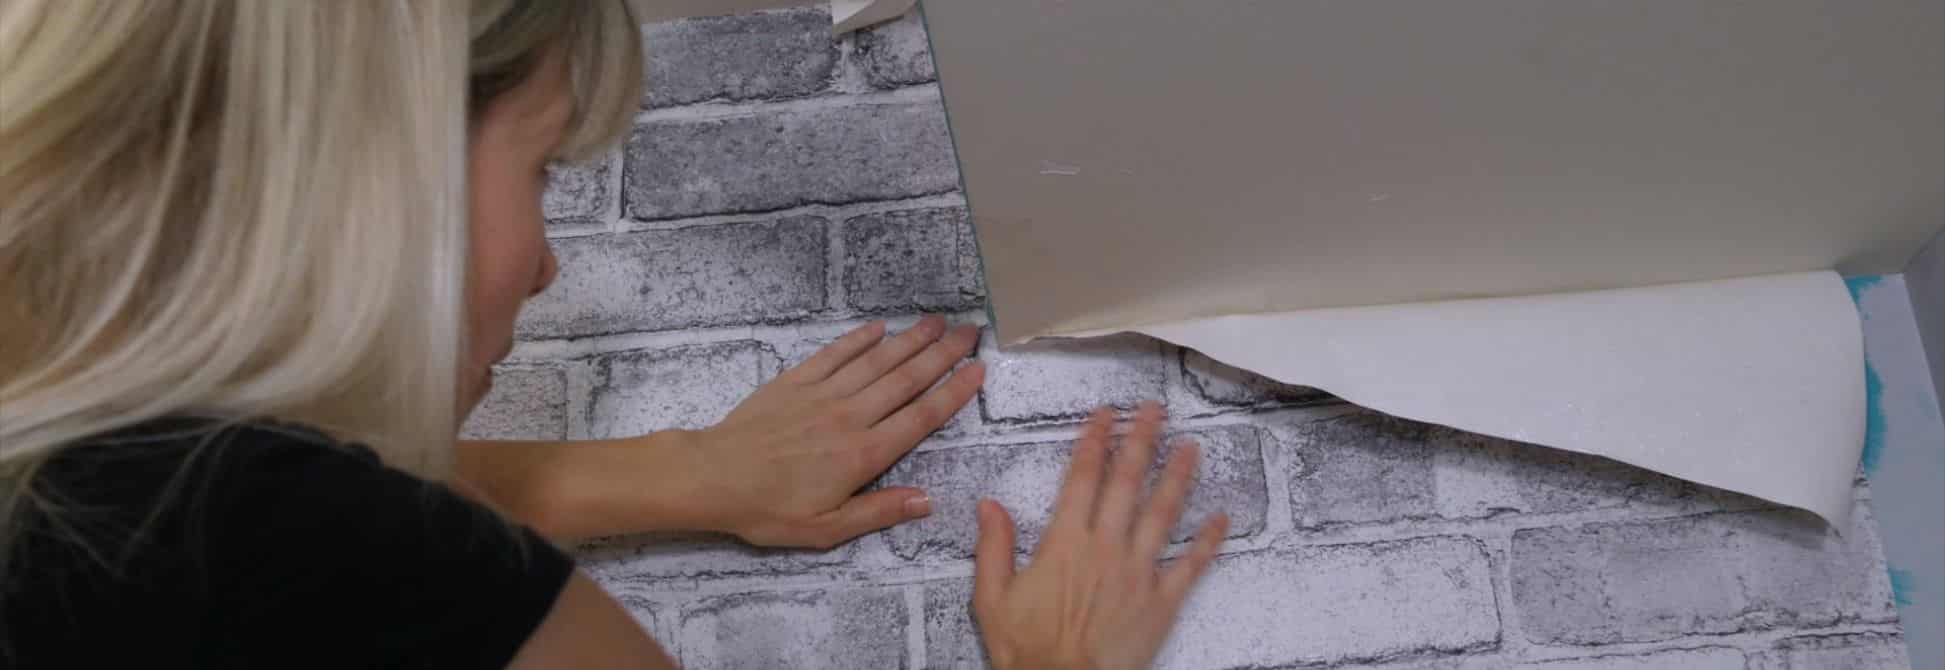 Learn wallpaper DIY tips from professional wallpaper installer, Adrienne, as she shares video tutorials on how to hang wallpaper, remove wallpaper, install into corners, on doors and more easy projects from About Murals.